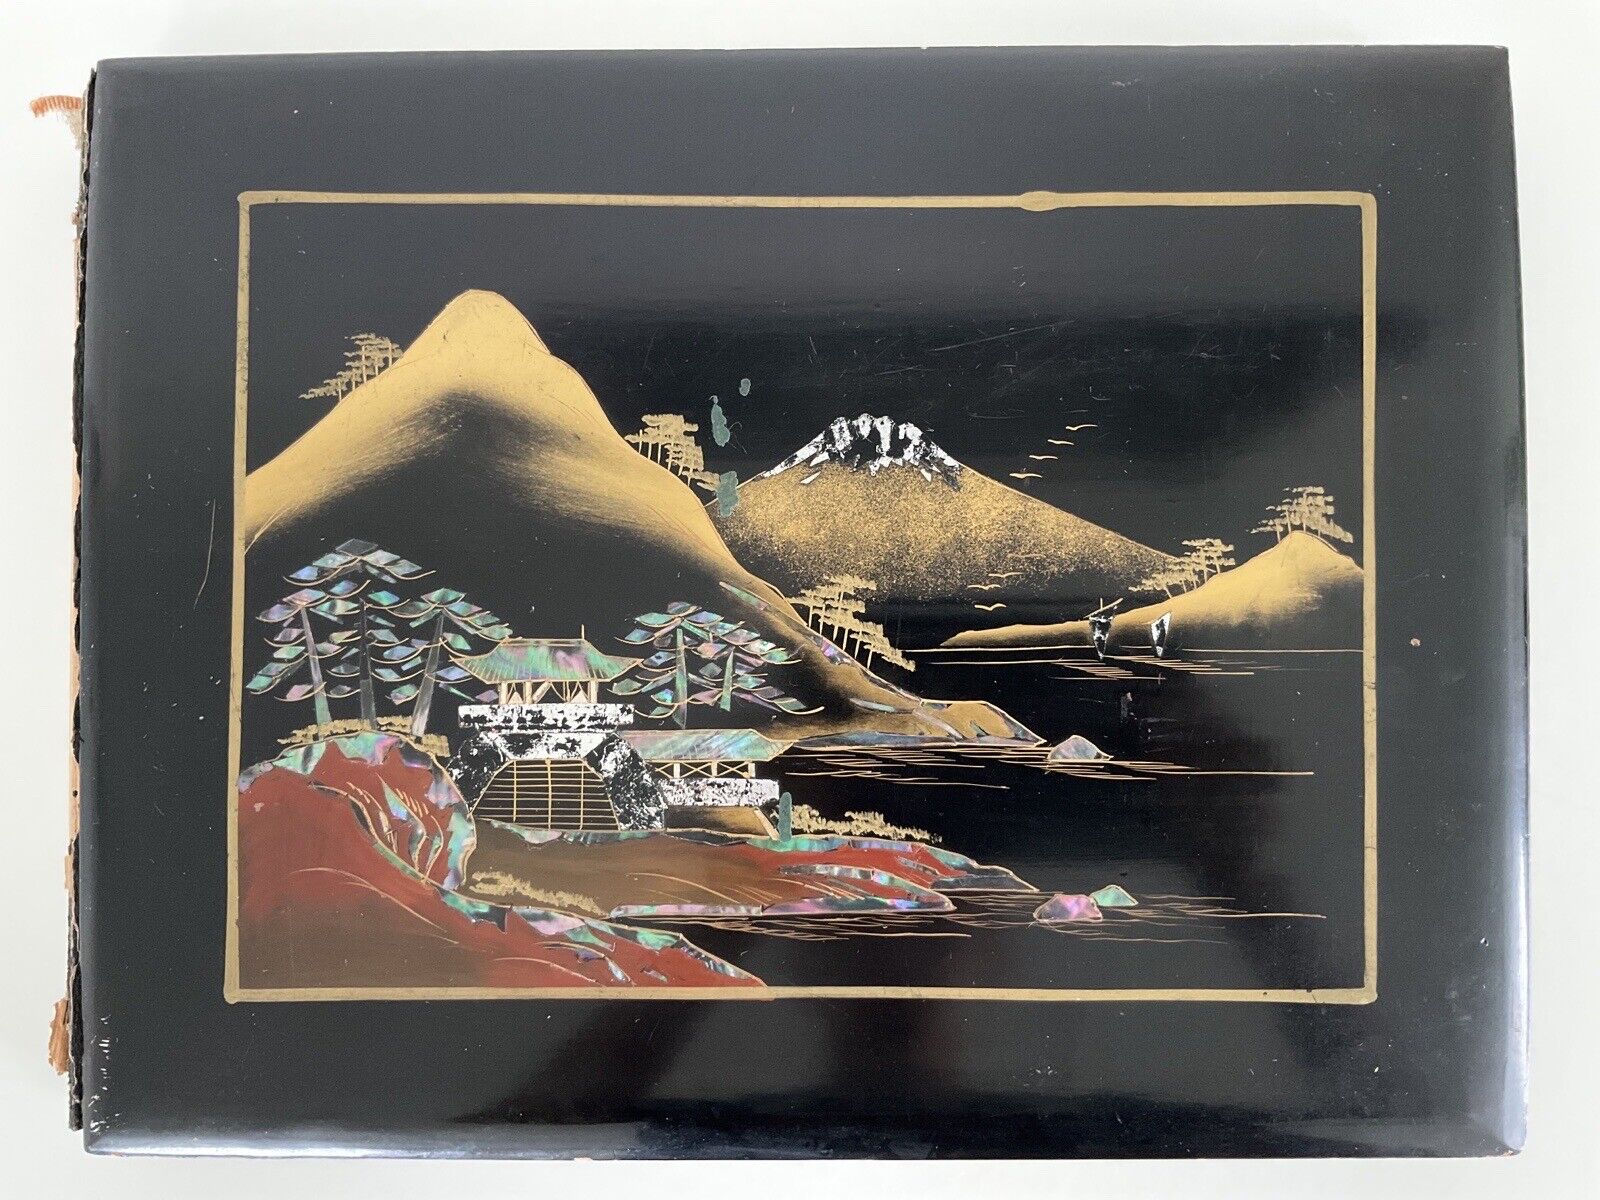 Vintage Ca.1940's Japanese Lacquer Mother of Pearl Album with Photos & Postcards